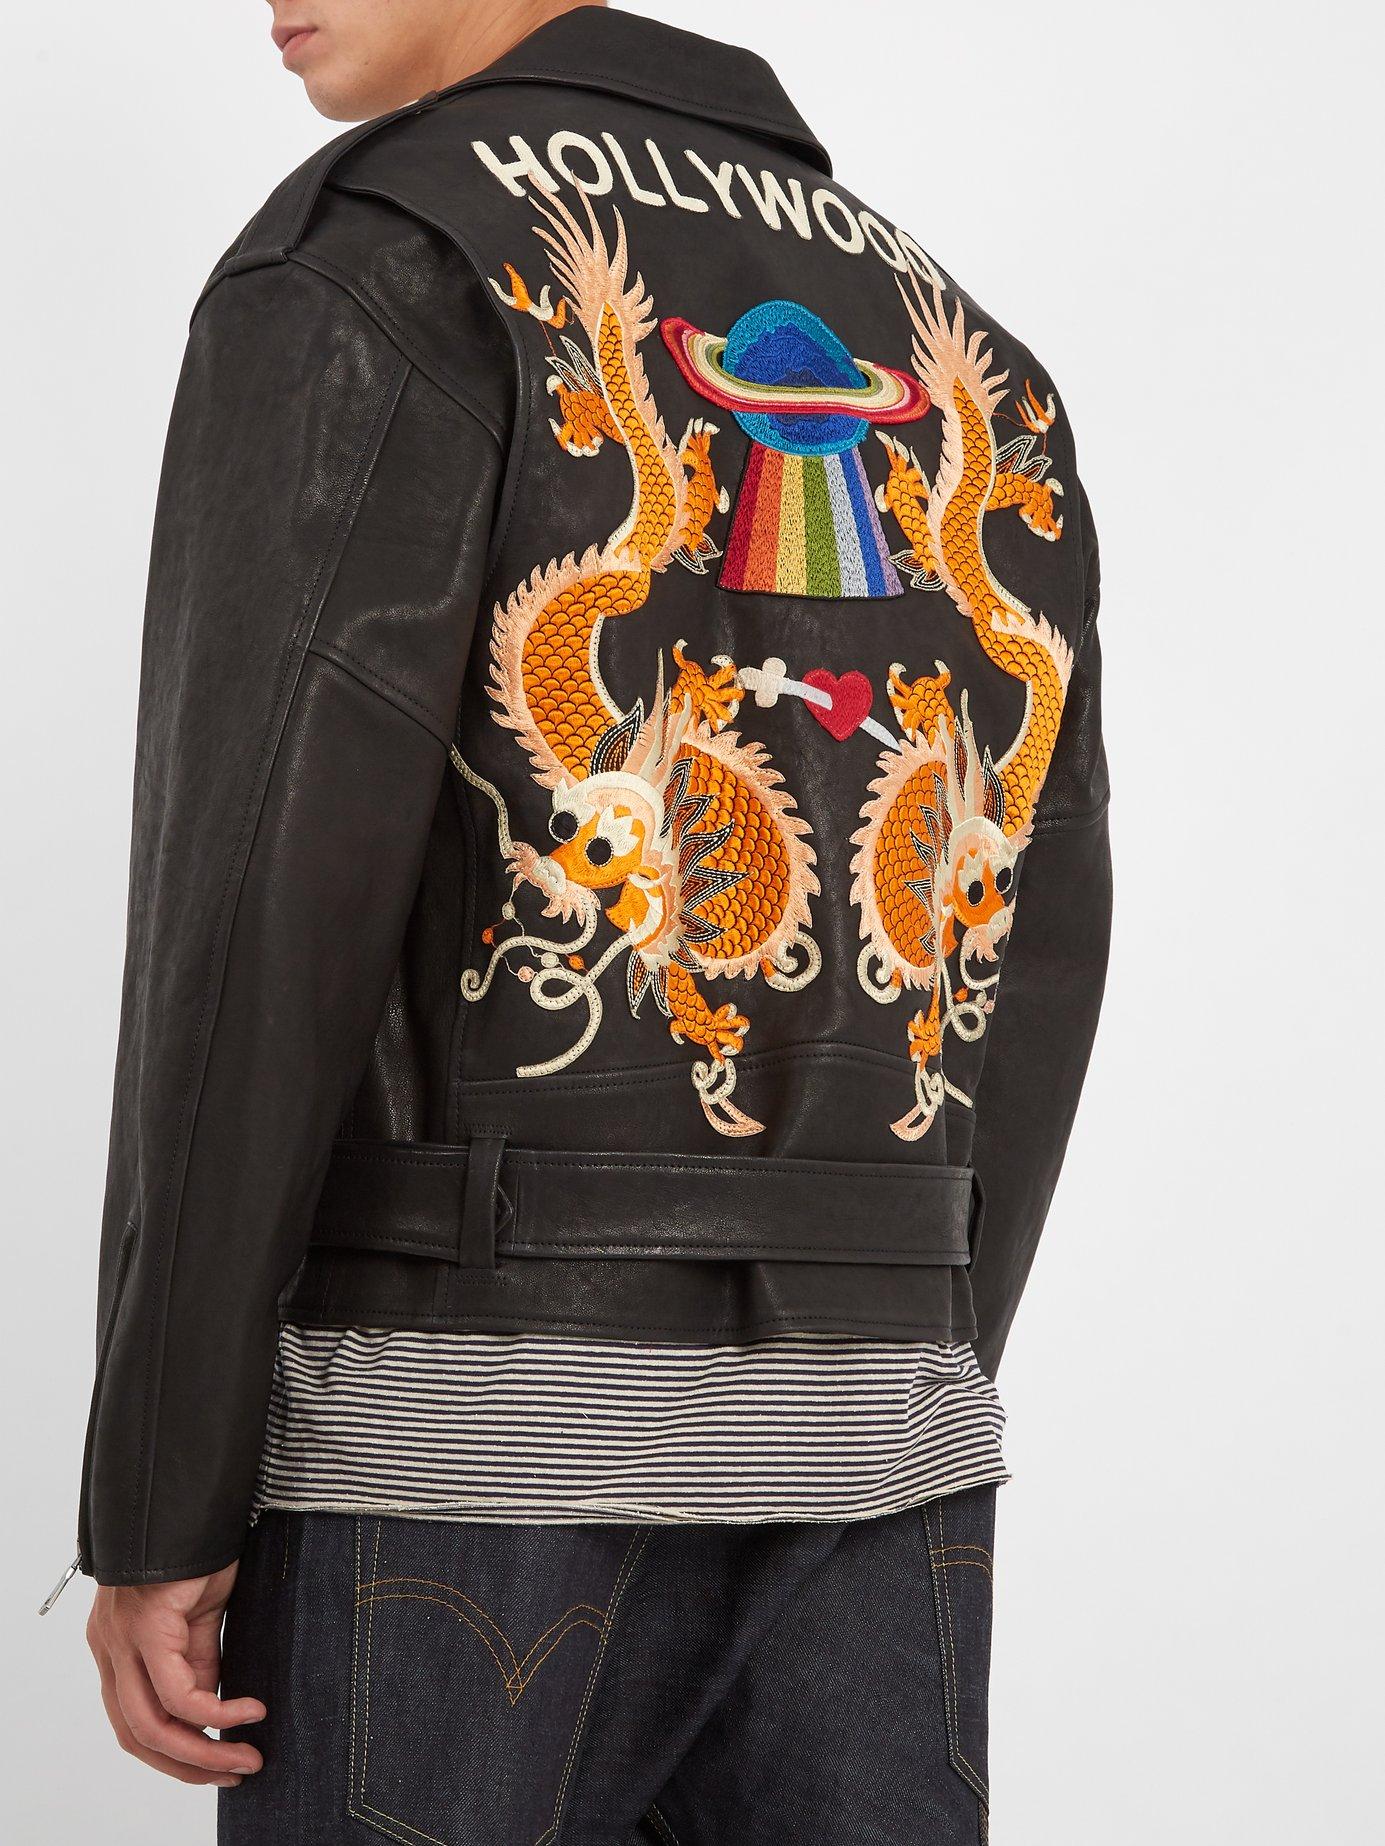 NWT $1650 Gucci Men's Dragon Applique Embroidered Tapered